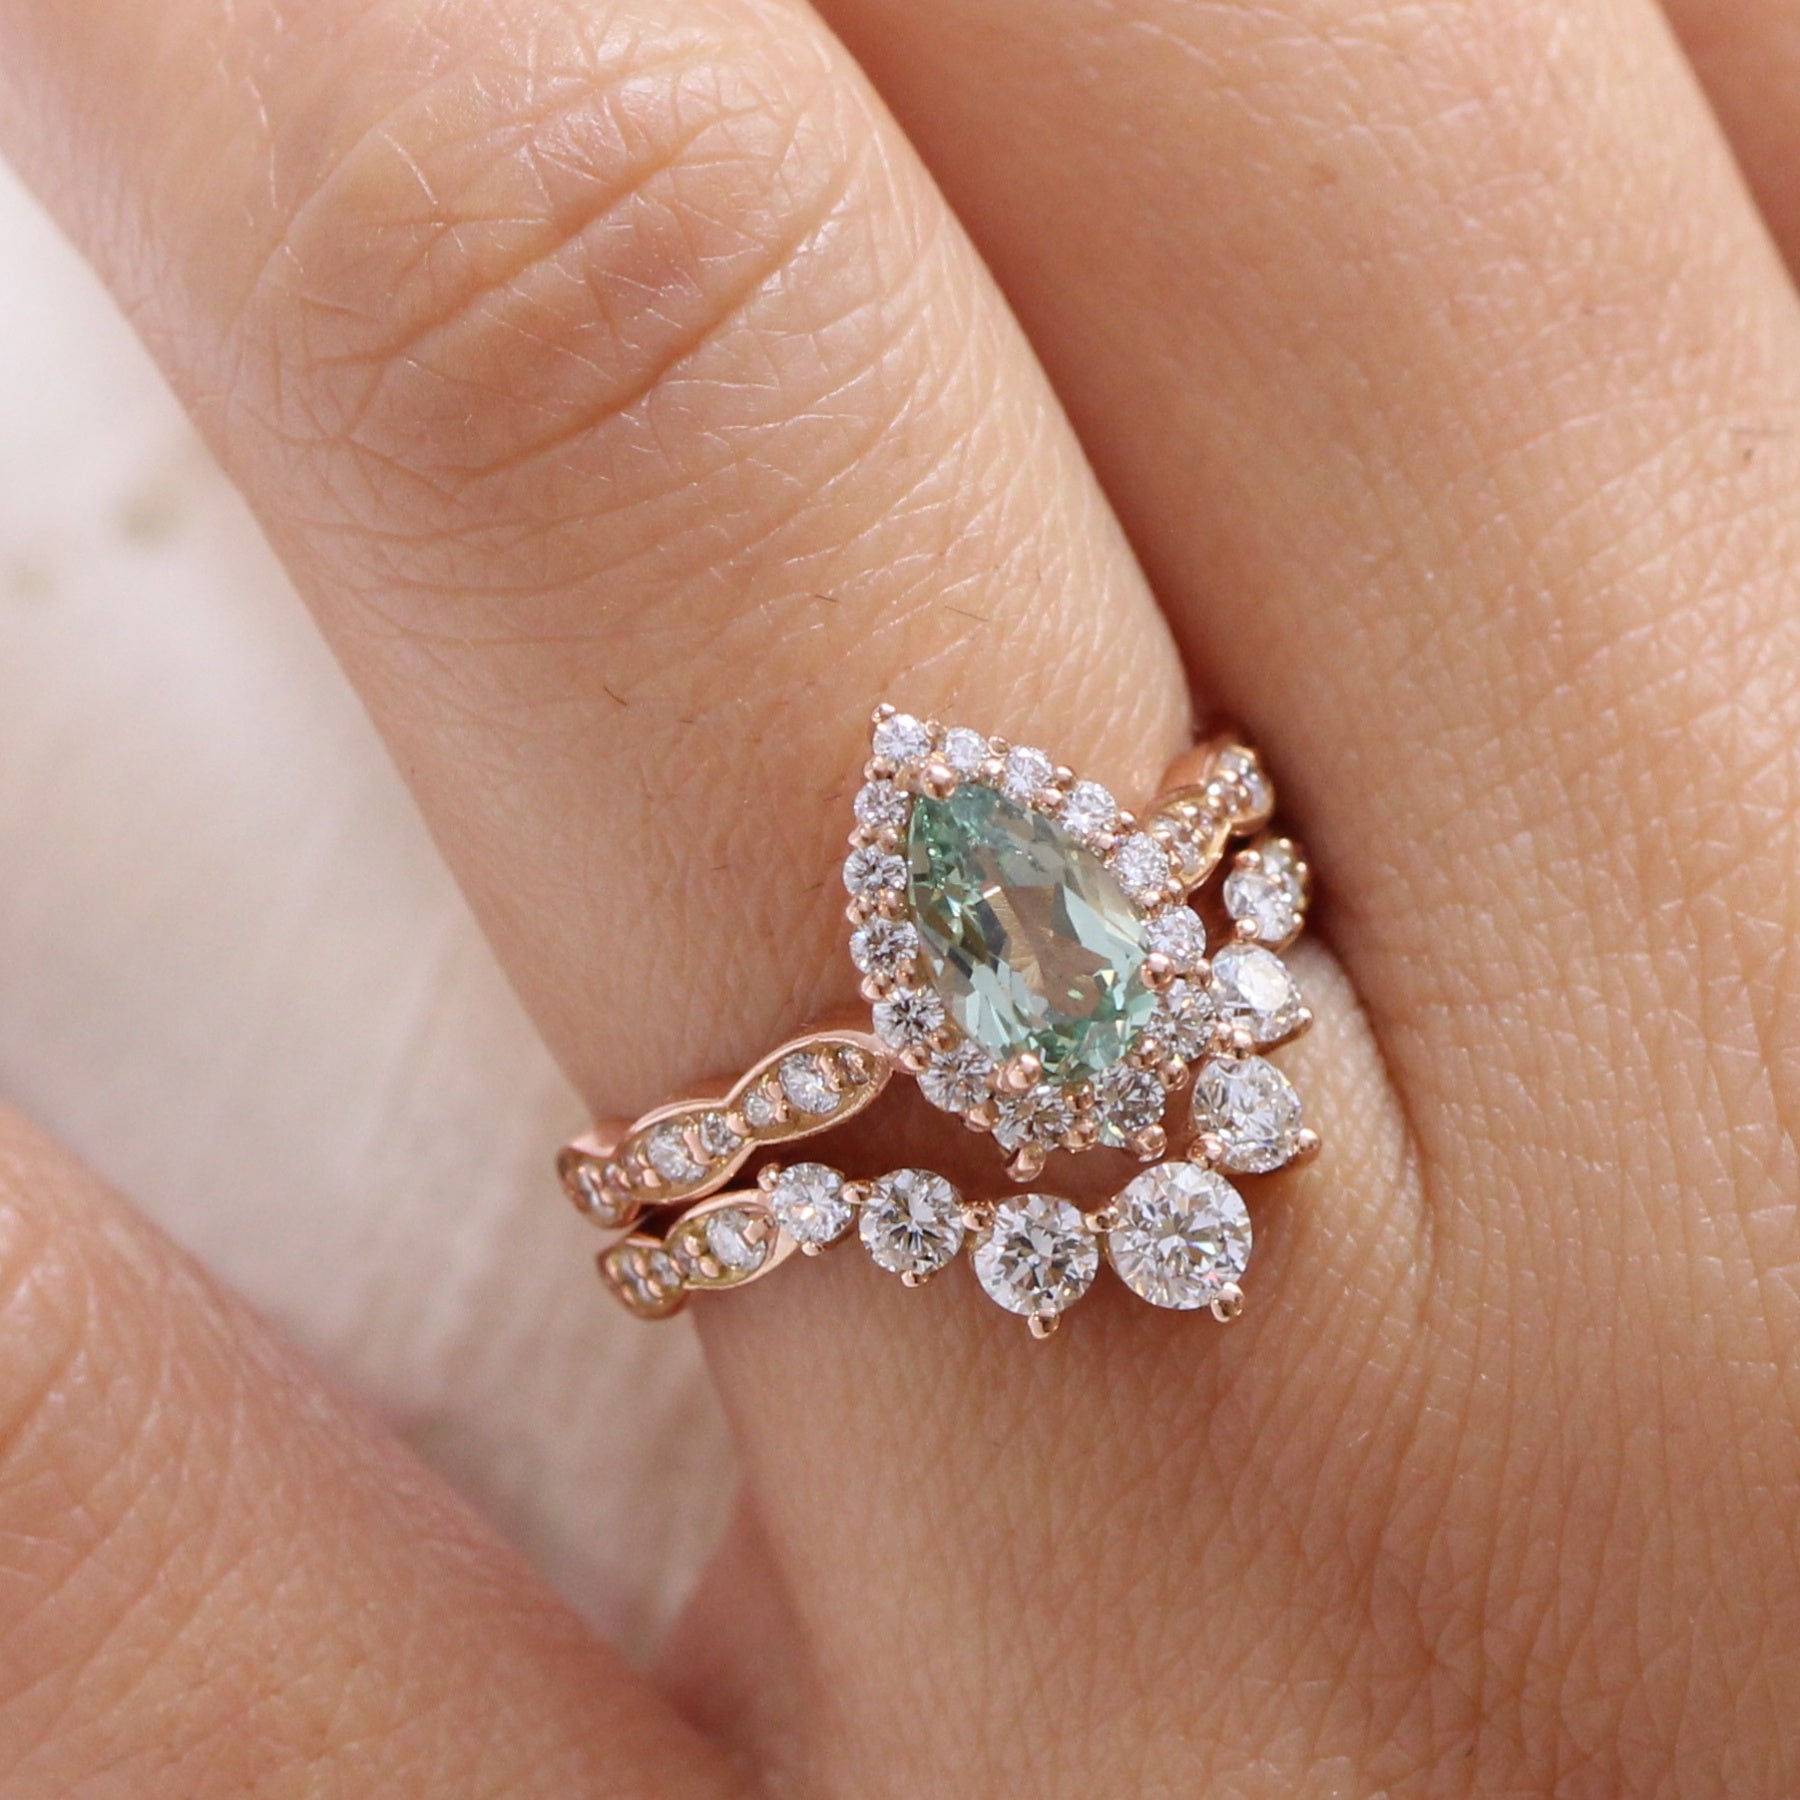 Pear green sapphire ring rose gold deep curved diamond wedding band la more design jewelry